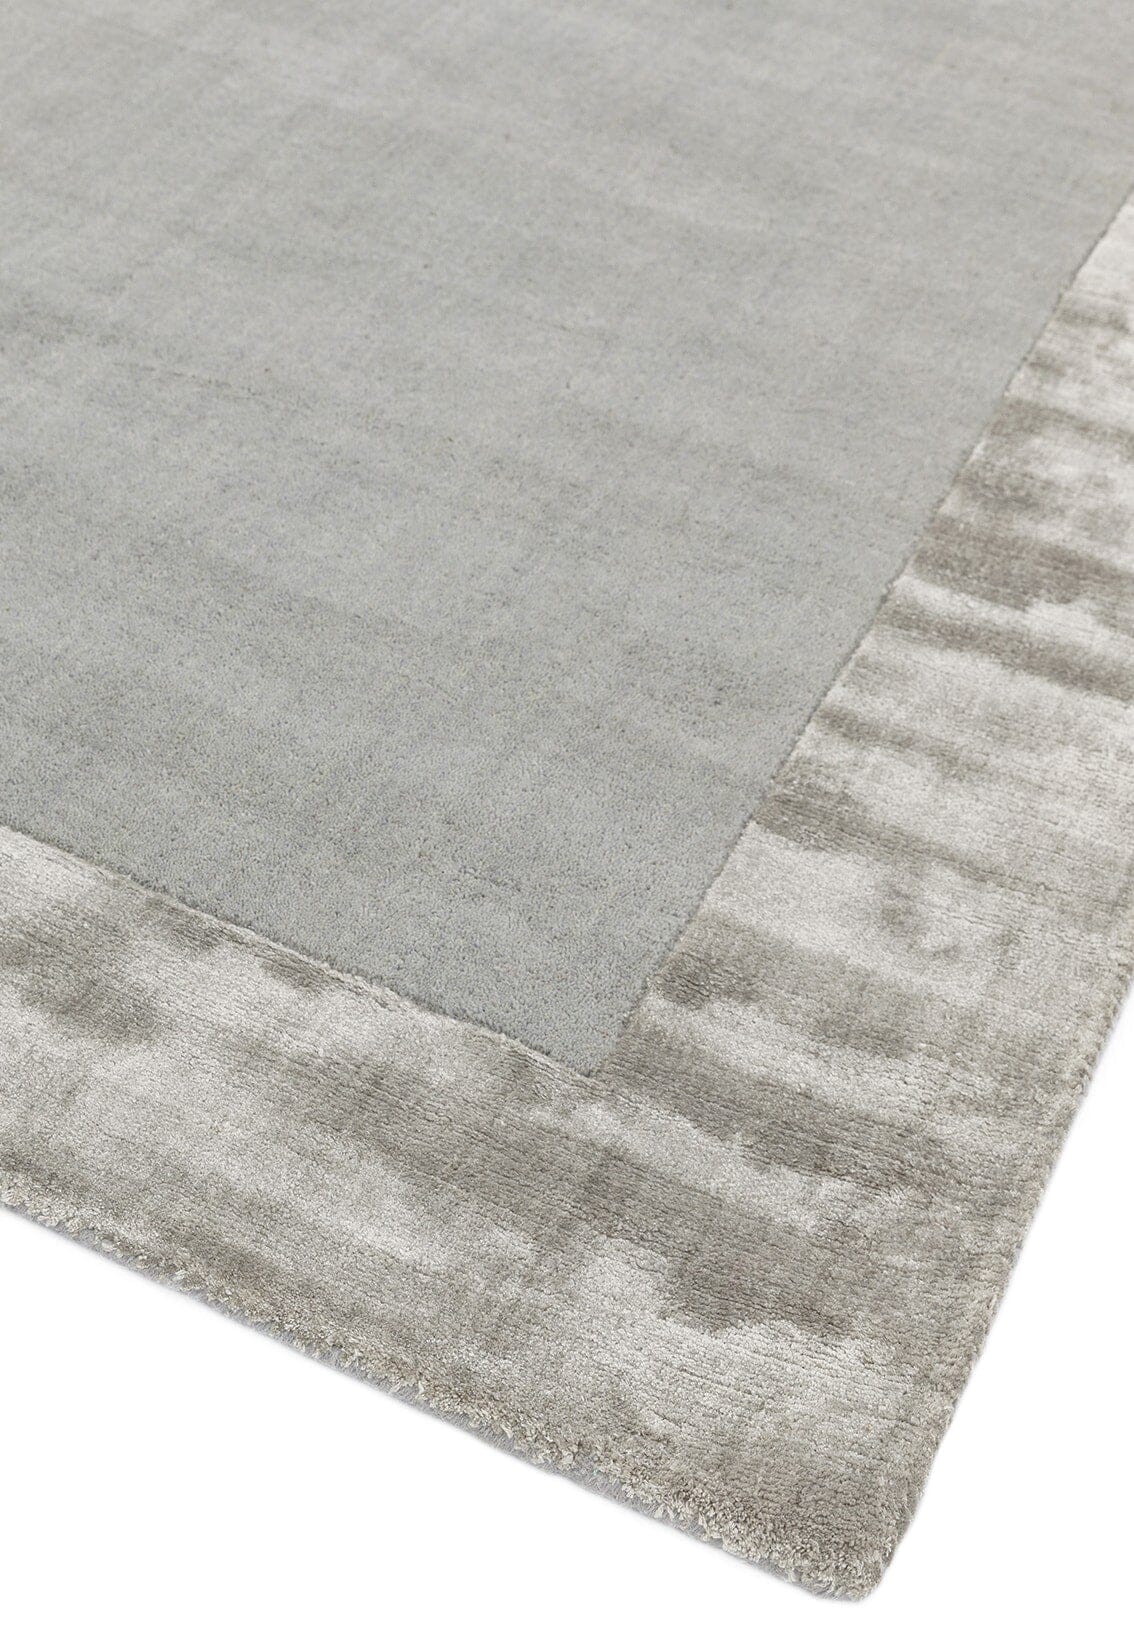  Asiatic Carpets-Asiatic Carpets Ascot Hand Woven Rug Silver - 80 x 150cm-Grey, Silver 589 